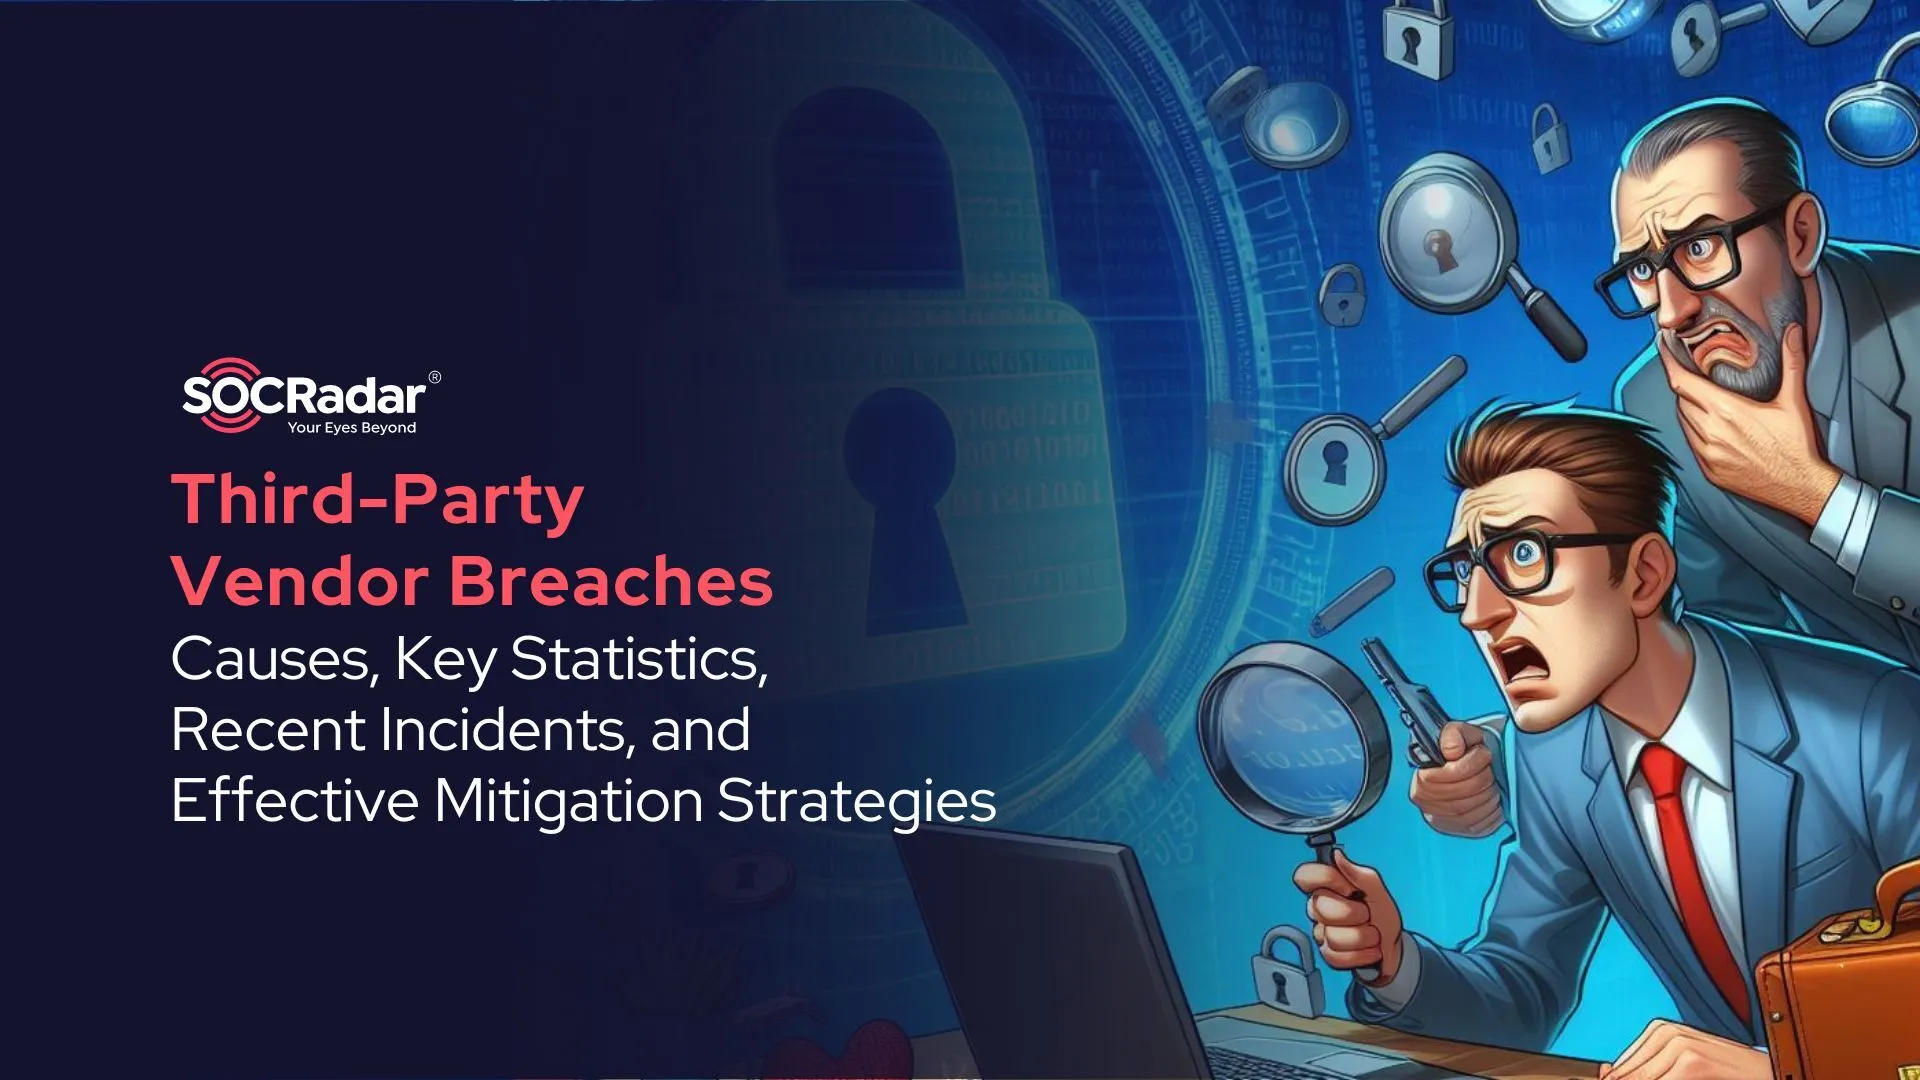 SOCRadar® Cyber Intelligence Inc. | Third-Party Vendor Breaches: Causes, Key Statistics, Recent Incidents, and Effective Mitigation Strategies